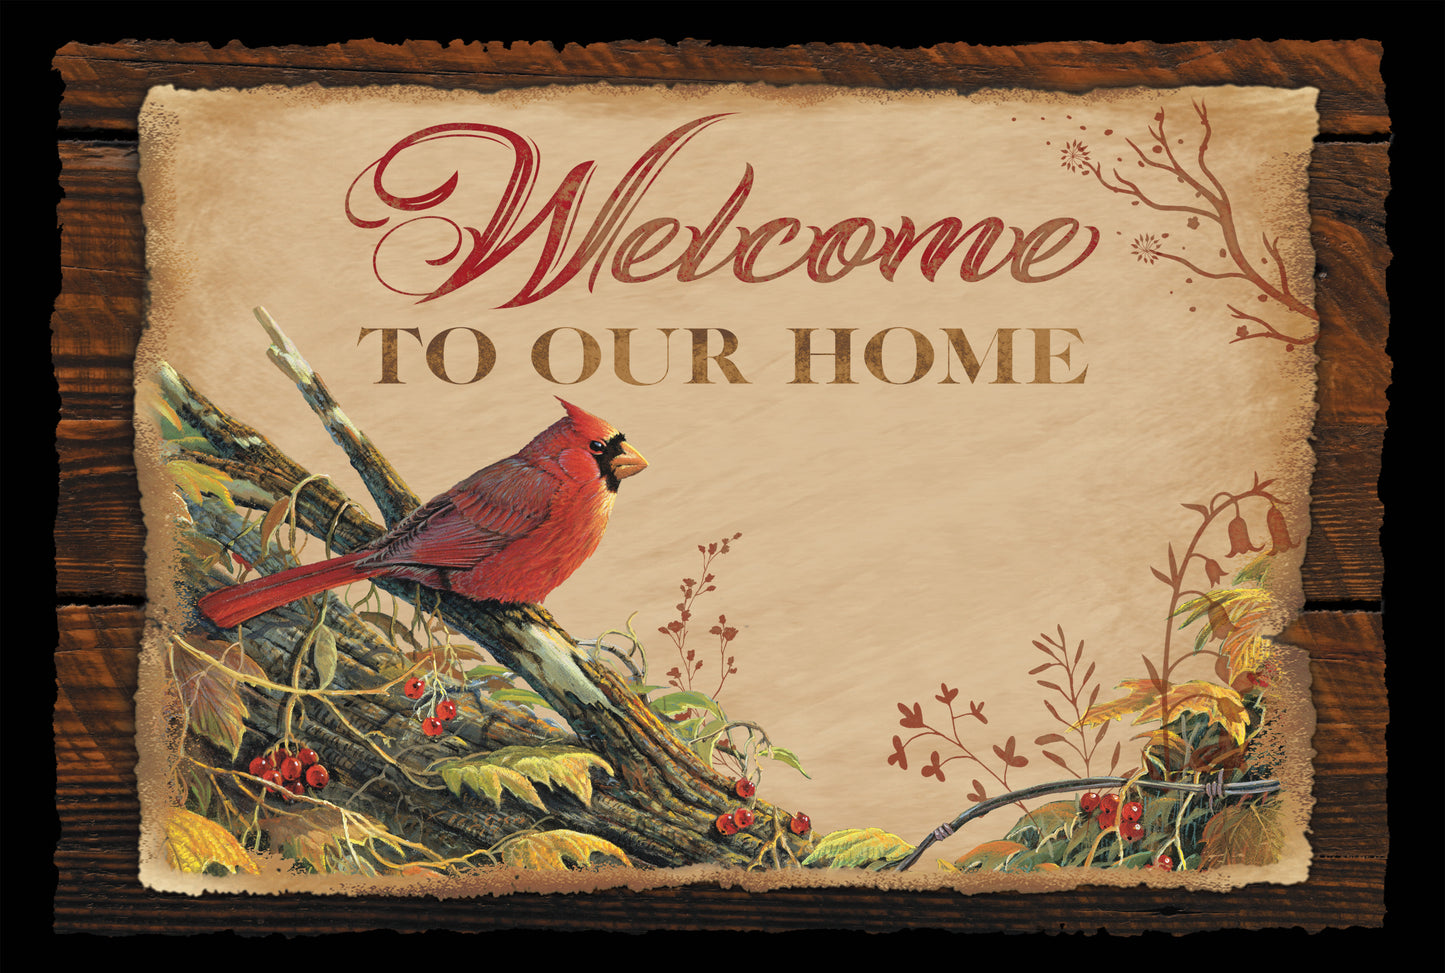 Welcome to Our Home - 8" x 12" Wood Sign